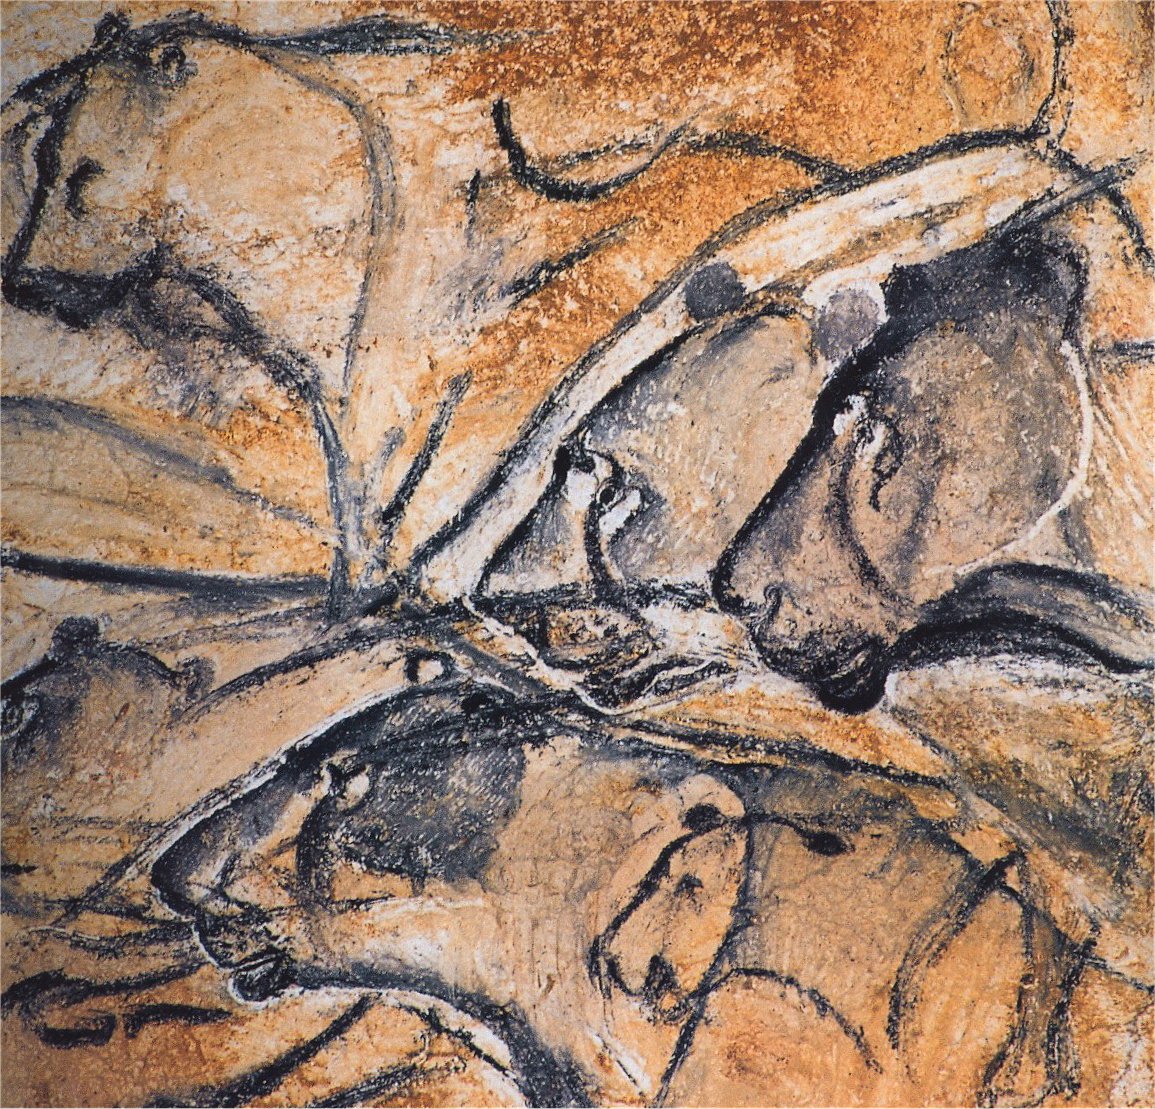 These lions found in a cave in France in 1994 are 32,000 years old, and are believed to be the oldest paintings ever discovered